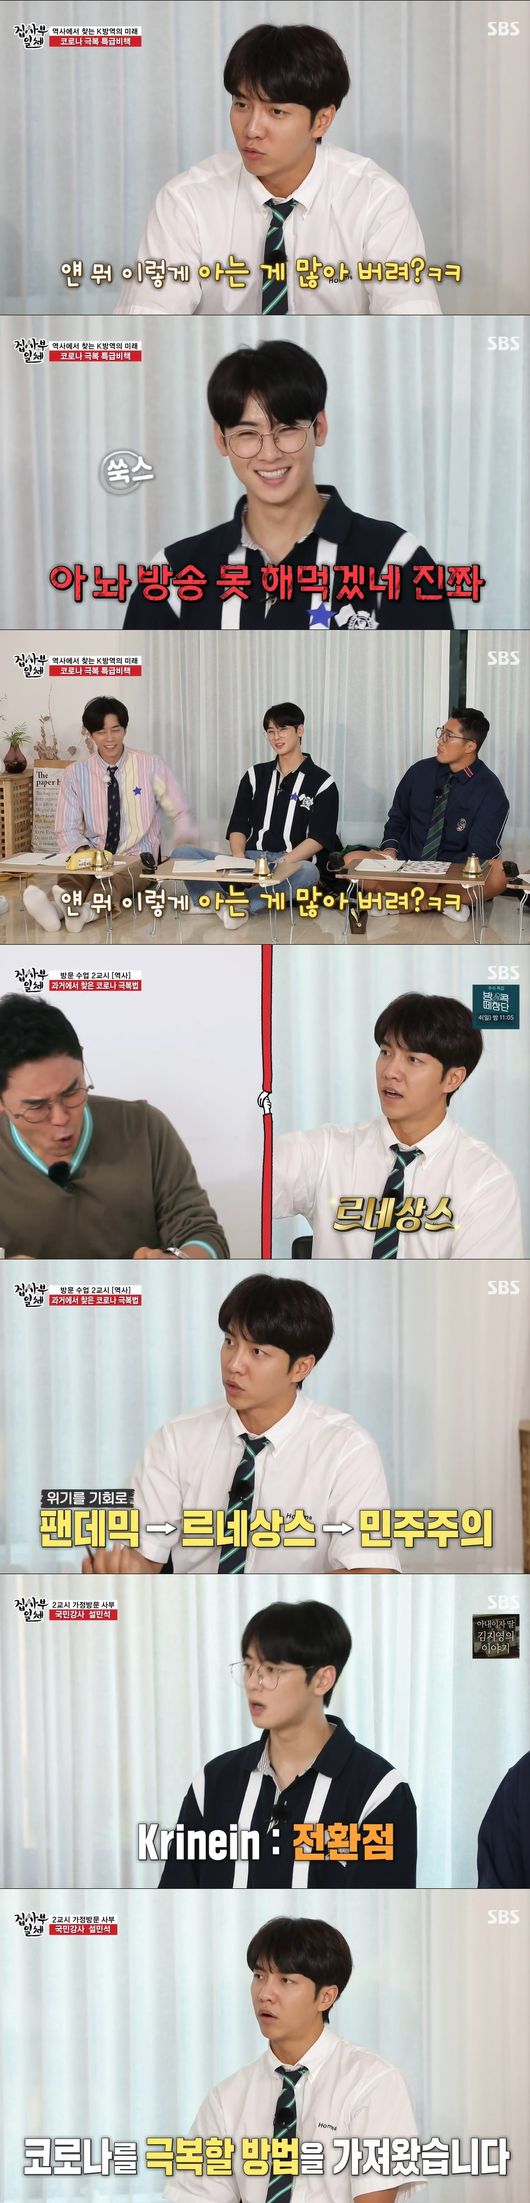 In All The Butlers, Lee Seung-gi and Cha Eun-woo once released knowledge, showing off the brains of the former church president Brothers.Cha Eun-woo and Lee Seung-gi played an active role in SBS entertainment All The Butlers broadcast on the 27th.On the first day of the day, I arrived at the daily school where the master is in the middle of the home visit class.All the bookshelves of memories were complete, and the members wearing uniforms showed a sense of excitement that they were sad in memories during their school days.He then told me about the anecdote about the milk party and drank chocolate sticks and laughed at them all saying Its not advertising, its my money. He drove Bunger and released Lunch box.Yang Se-hyeong laughed at Lee Seung-gis Kimbap Lunch box and said, Kimbap cheap in the store.Shin Sung-rok also took out the Lunch box he bought in the Lunch box, and Cha Eun-woo was impressed by the Lunch box with the letter, revealing the Lunch box full of sincerity that his mother had wrapped.Kim Dong-Hyun revealed his own Lunch box, and was surprised by all the quality cooking skills.Yang Se-hyeong unveiled a blockbuster-scale Lunch box, which he laughed at as if he had moved a refrigerator of his house while preparing a spoon.Yang Se-hyeong took out a pot prepared to make beef soup and said, It was better not to be stressed, to come to my mang.At this point, the crew returned all Lunch box forward.During his small school days, he asked to select Lunch box and weekly number through play, and the Lunch box war was held to use rice.First, Lee Seung-gi took the Yang Se-hyeong Lunch box from the first game, and Yang Se-hyeong used the Cha Eun-woo Lunch box.But in the end, they all shared the Lunch box together and gave it a warm heart.Shin Sung-rok started his class in earnest, with Tyler, a global brain-sex, and then introduced a clock that marked the environment.Tyler asked about climate Dangers biggest problem, and Cha Eun-woo answered: Global warming.Tyler shocked everyone by saying that if the trend lasts more than 30 years, the global temperature will rise and Busan, which is the sea, will become the peninsula.Its time to turn back the clock as soon as possible to threaten our survival. Tyler said, Well figure out how to do it.In all, Cha Eun-woo has hit the livestock industry, which emits 18 percent of greenhouse gases, while Tyler contributes to absorbing carbon dioxide and preventing global warming, but because he has turned the plant into a farm by logging the house, he produces feed and produces greenhouse gases when livestock eats and excretes.Various greenhouse gases emitted by the livestock industry are the main culprits of global warming.Next, Seol Min-Seok, a Korean history teacher who is heartbreaking in the second period, appeared.The beginning of the pandemic epidemic is not the first time Corona 19 is the first, Seol Min-Seok said, referring to the worst pandemic in human history.Lee Seung-gi and Cha Eun-woo hit the plague, the plague, which was 50 to 90% fatality rate in the 14th century, and Cha Eun-woo boasted knowledge, saying, More than a third of the European population died at the time.Everyone admired How much knowledge is in your head, and Cha Eun-woo was delighted that history is fun.Seol Min-seok said, It is the beginning of the first bacterial warfare. However, he was interested in saying that Danger is the key to the opportunity, the world has changed since Pandemic, and it will be after Corona.Seol Min-Seok said, The time has come to explore humans rather than praise God. Lee Seung-gi said, It is the Renaissance era.Seol Min-Seok added, The starting point of democracy is also the result of fandemics. He said, It is too painful now, but we have to overcome this Danger with self-esteem and courage.Next, I talked about Coronas overcoming expressive measures learned in history.Cha Eun-woo continued to answer the correct question of history, and the members said, I can not broadcast, we will do some.Seol Min-Seok mentioned smallpox and said it was a completely end-of-life disease and that a British scholar named Jenner had created a treatment.Cha Eun-woo smiled, saying that there was a scene where he dealt with the disease in the drama while correcting the correct answer saying Seol Min-Seok mentioned the bellhead, Lee Seung-gi answered Ji Seok-youngs bellhead and the members said, There are many smart friends.All The Butlers broadcast screen capture